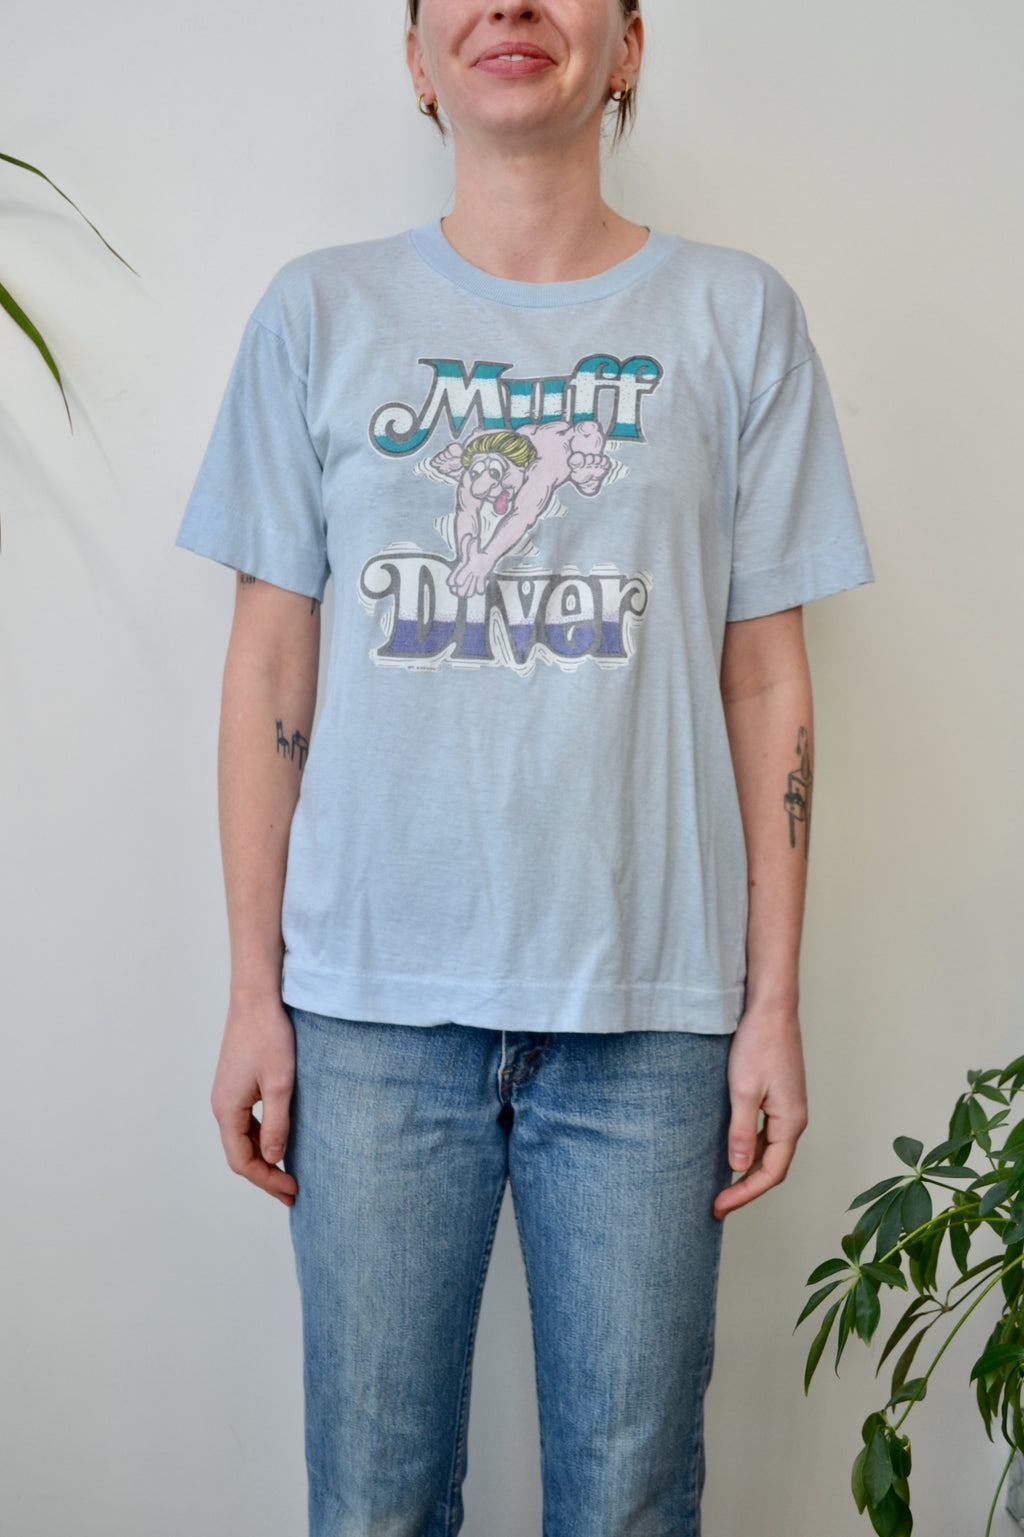 Muff Diver Tee